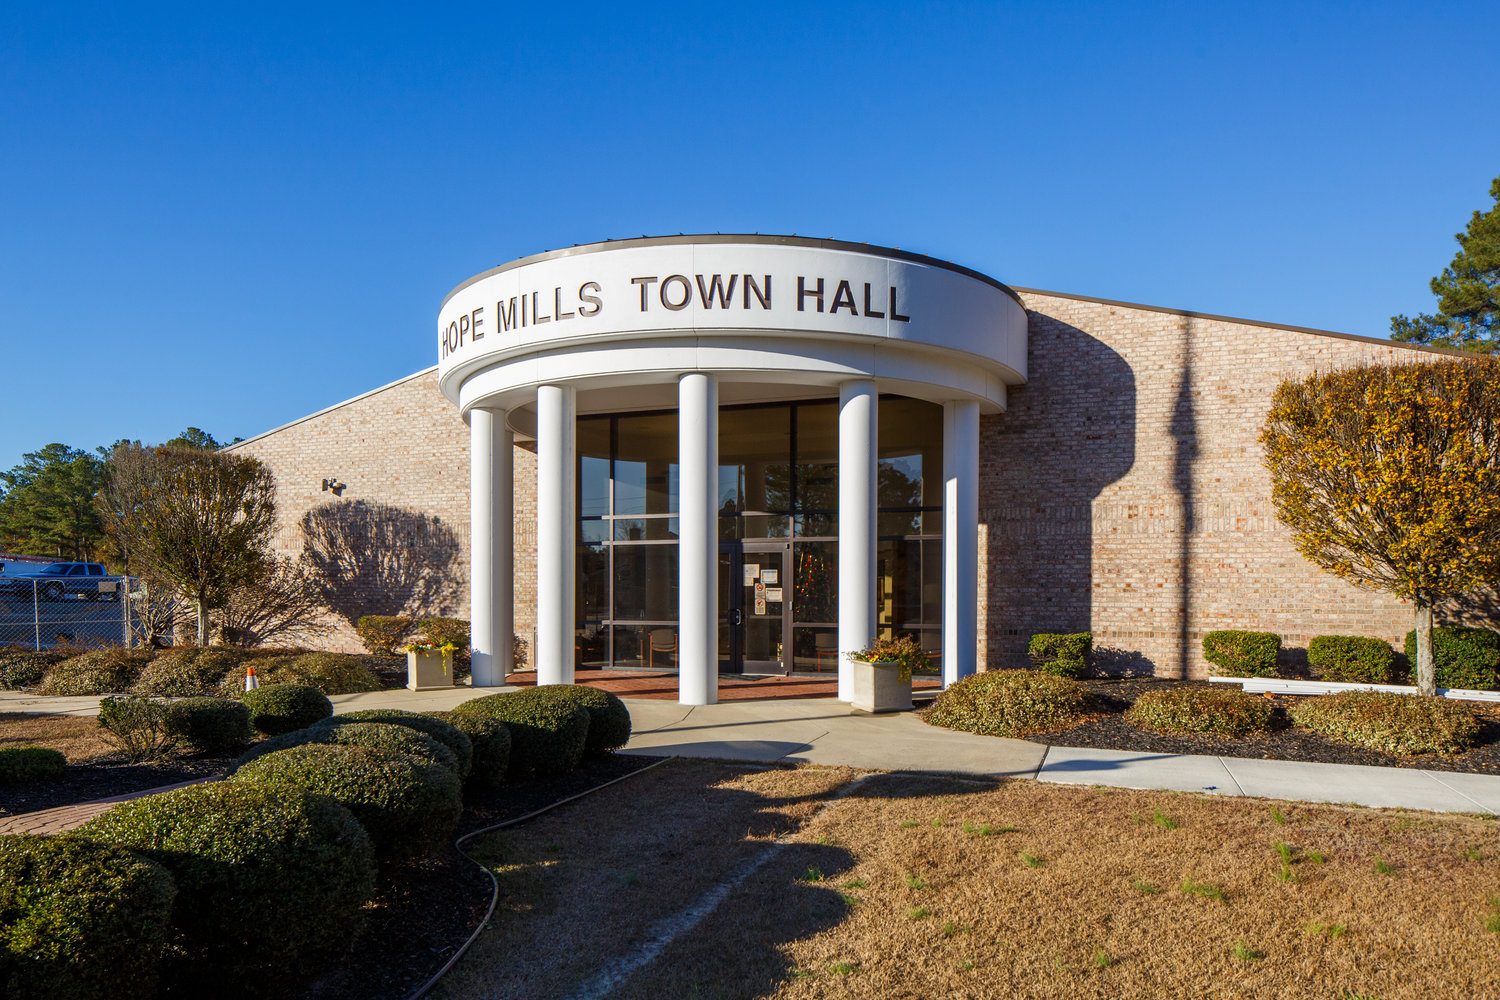 The Hope Mills Board of Commissioners on Monday night approved initial zoning for the town manager’s home.